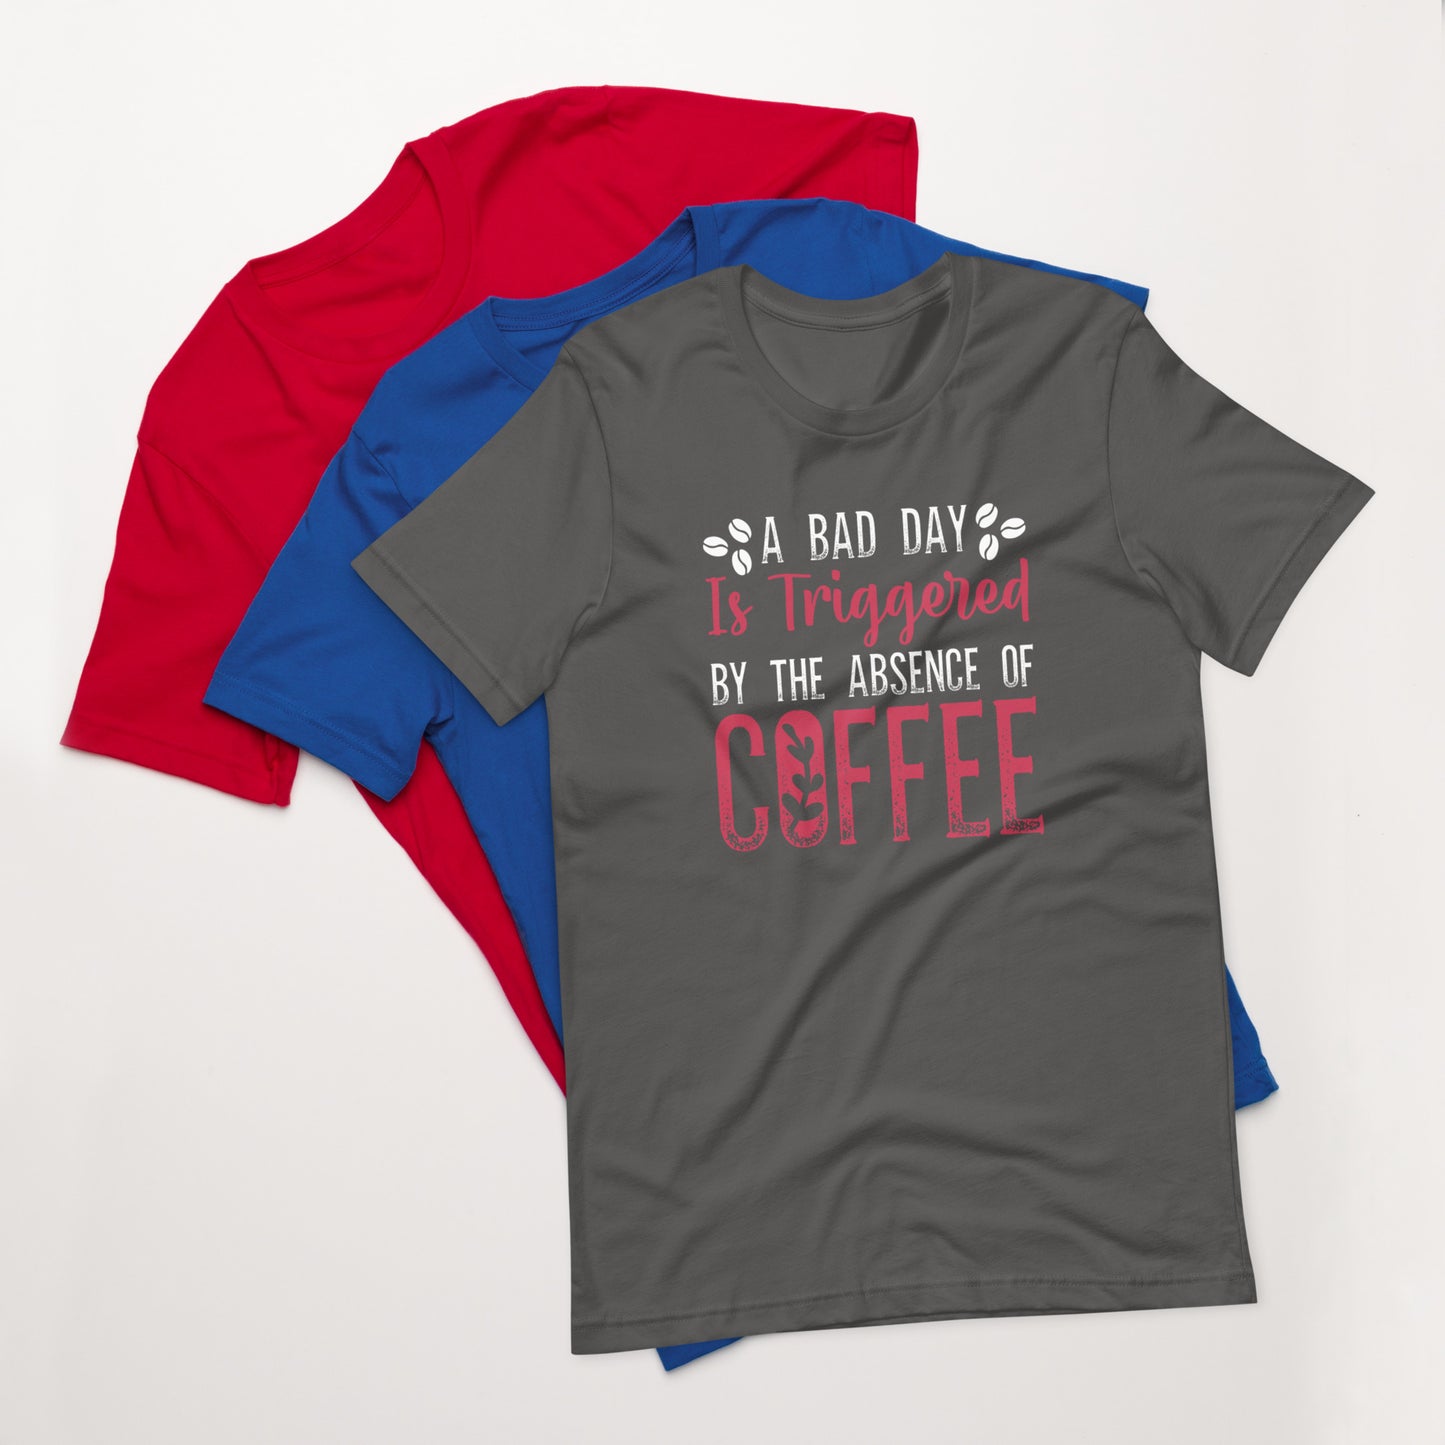 A Bad Day is Triggered by the Absence of Coffee Tshirt